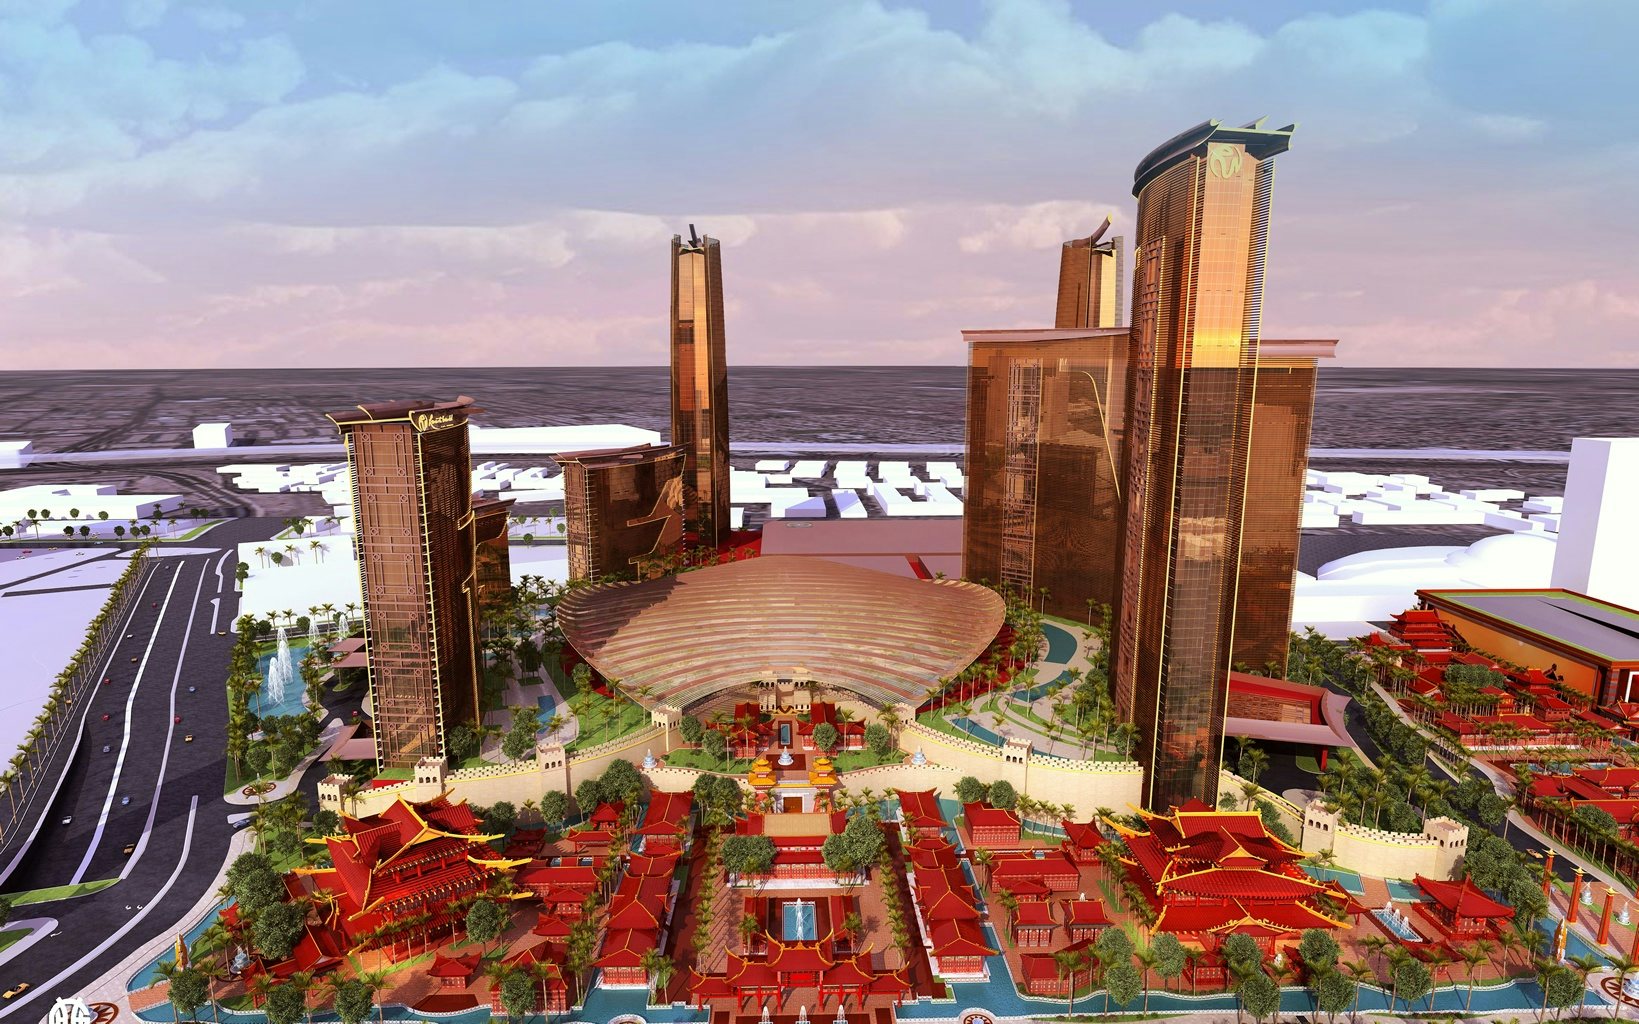 Genting is changing the original design (pictured) to make it more appealing among China's young travelers. (Courtesy Photo)